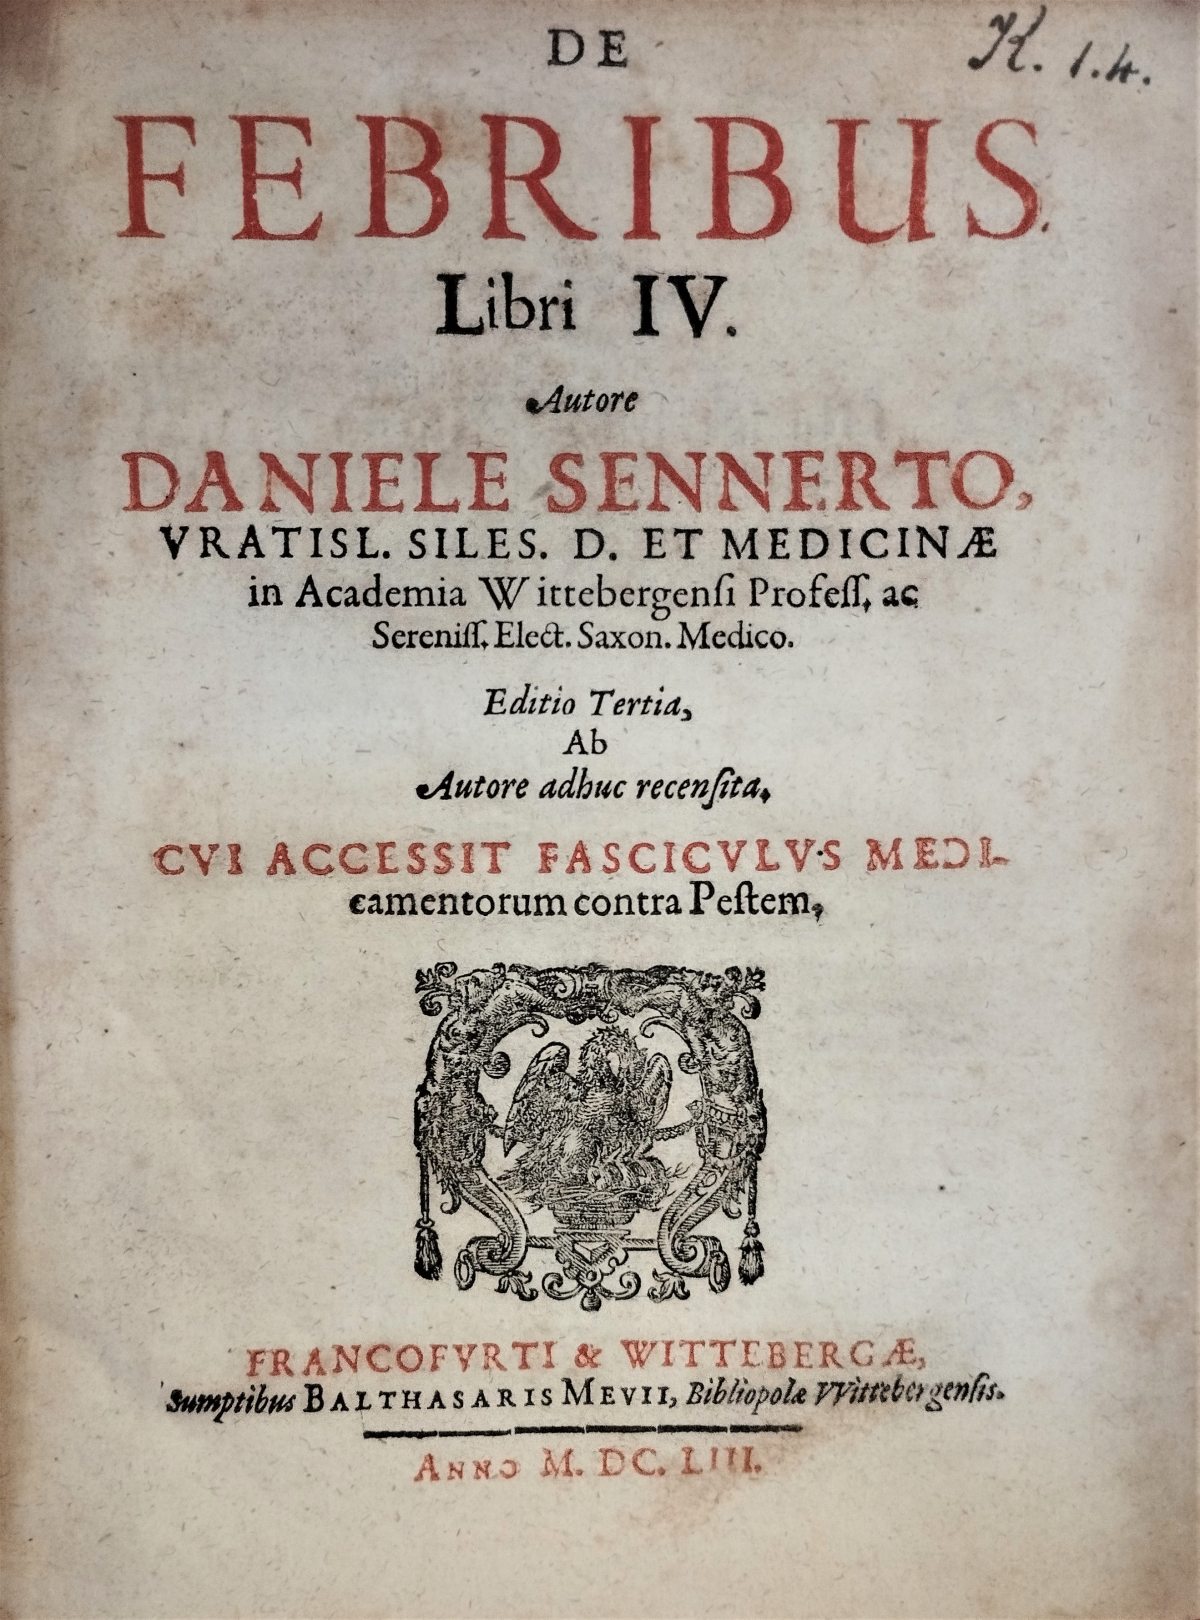 The title page in a 17th-century printed book, with a Latin text printed in red and black and a woodcut printer's device of a pelican feeding its young with blood from its breast.